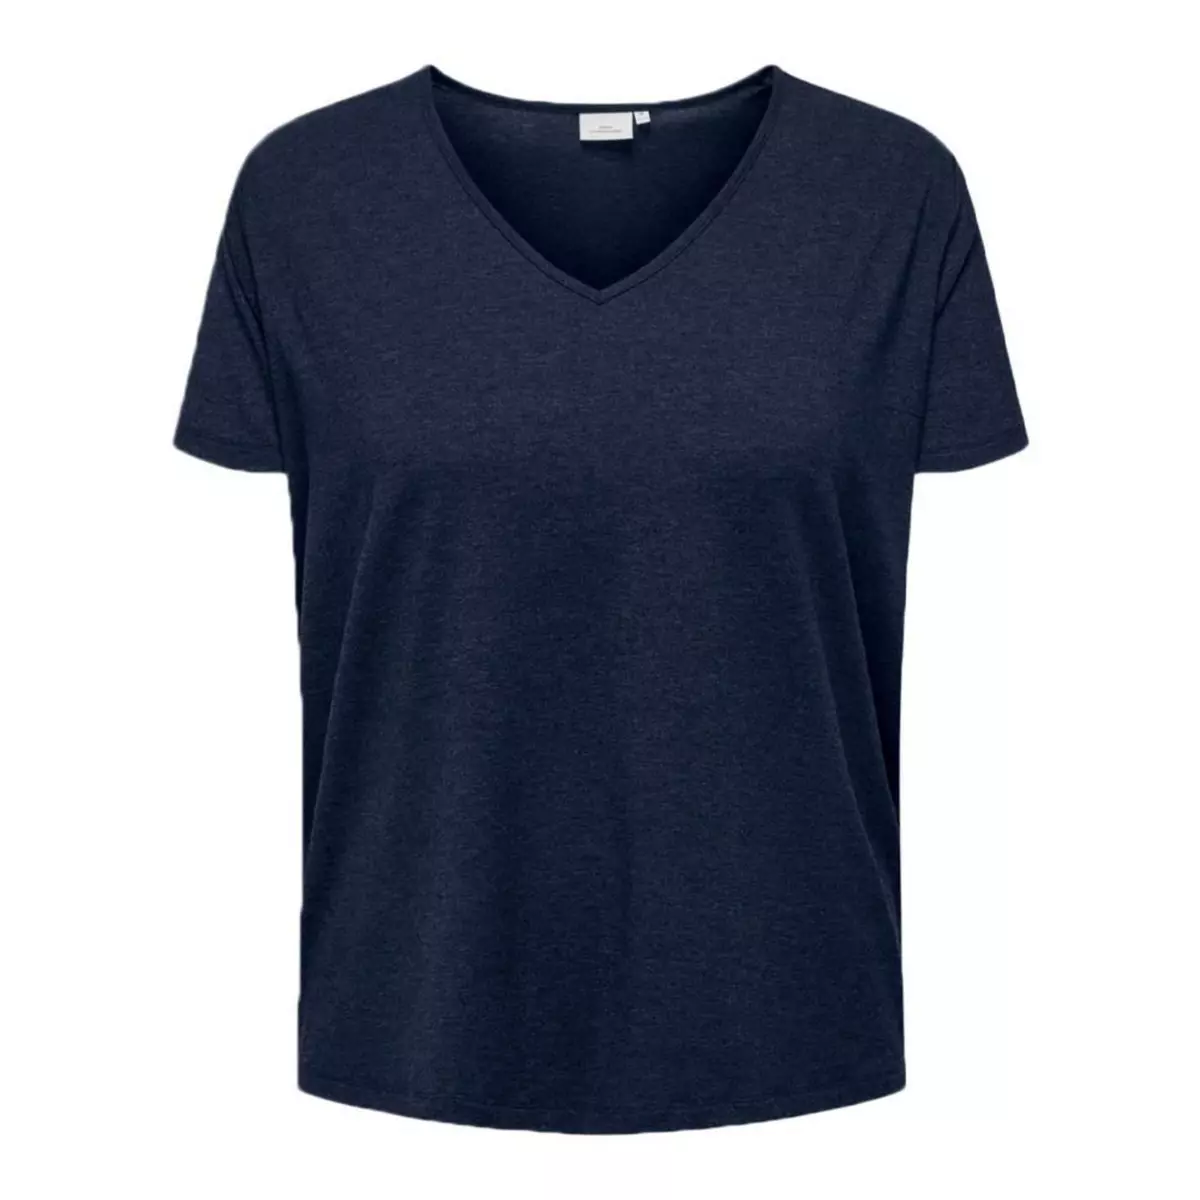  T-shirt Marine Femme Only Carmakoma Tape Top